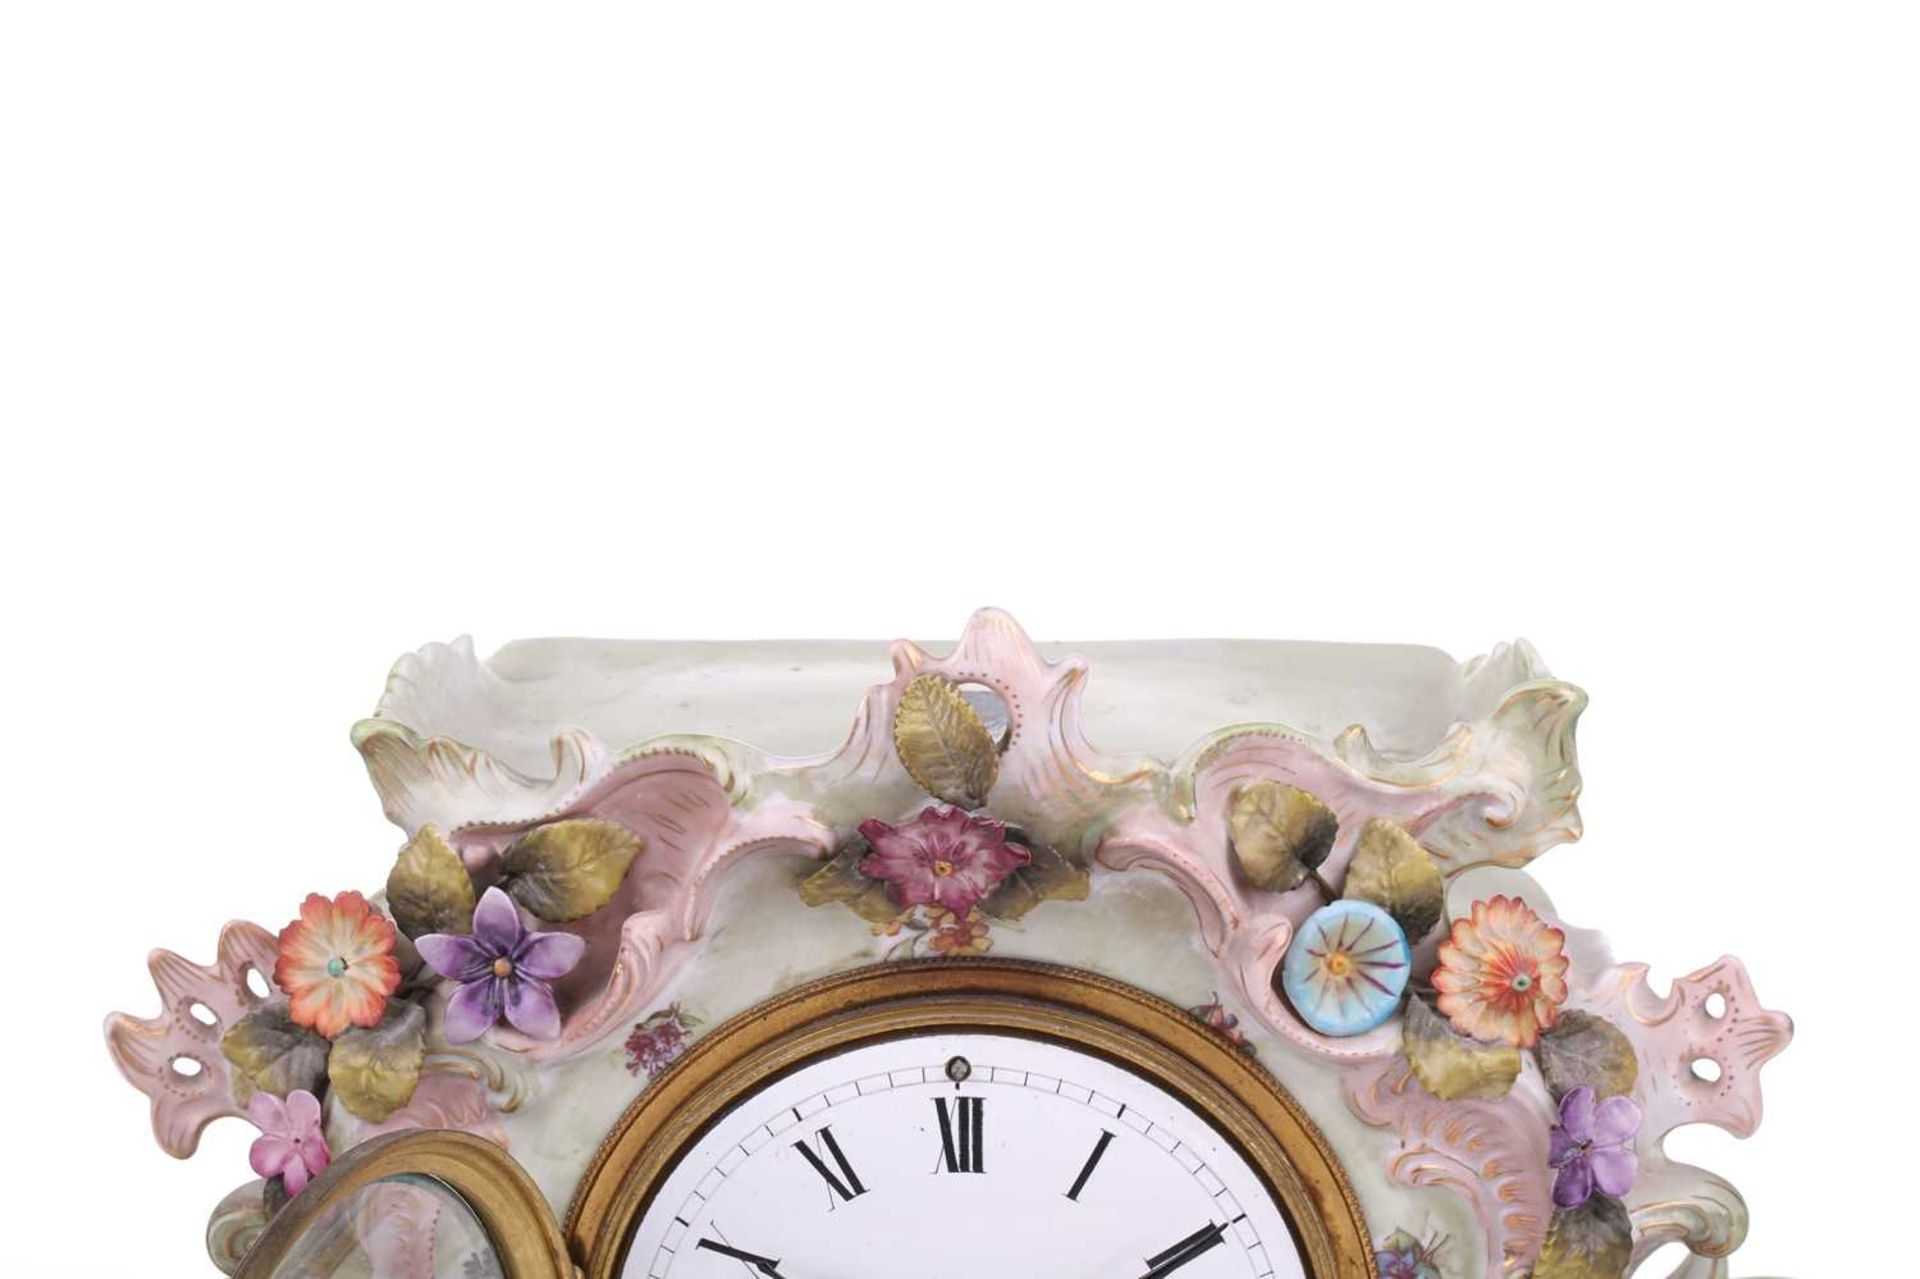 A late 19th-century German Porcelain figural 8-day mantel clock with cherubic and muse surmount - Image 14 of 19